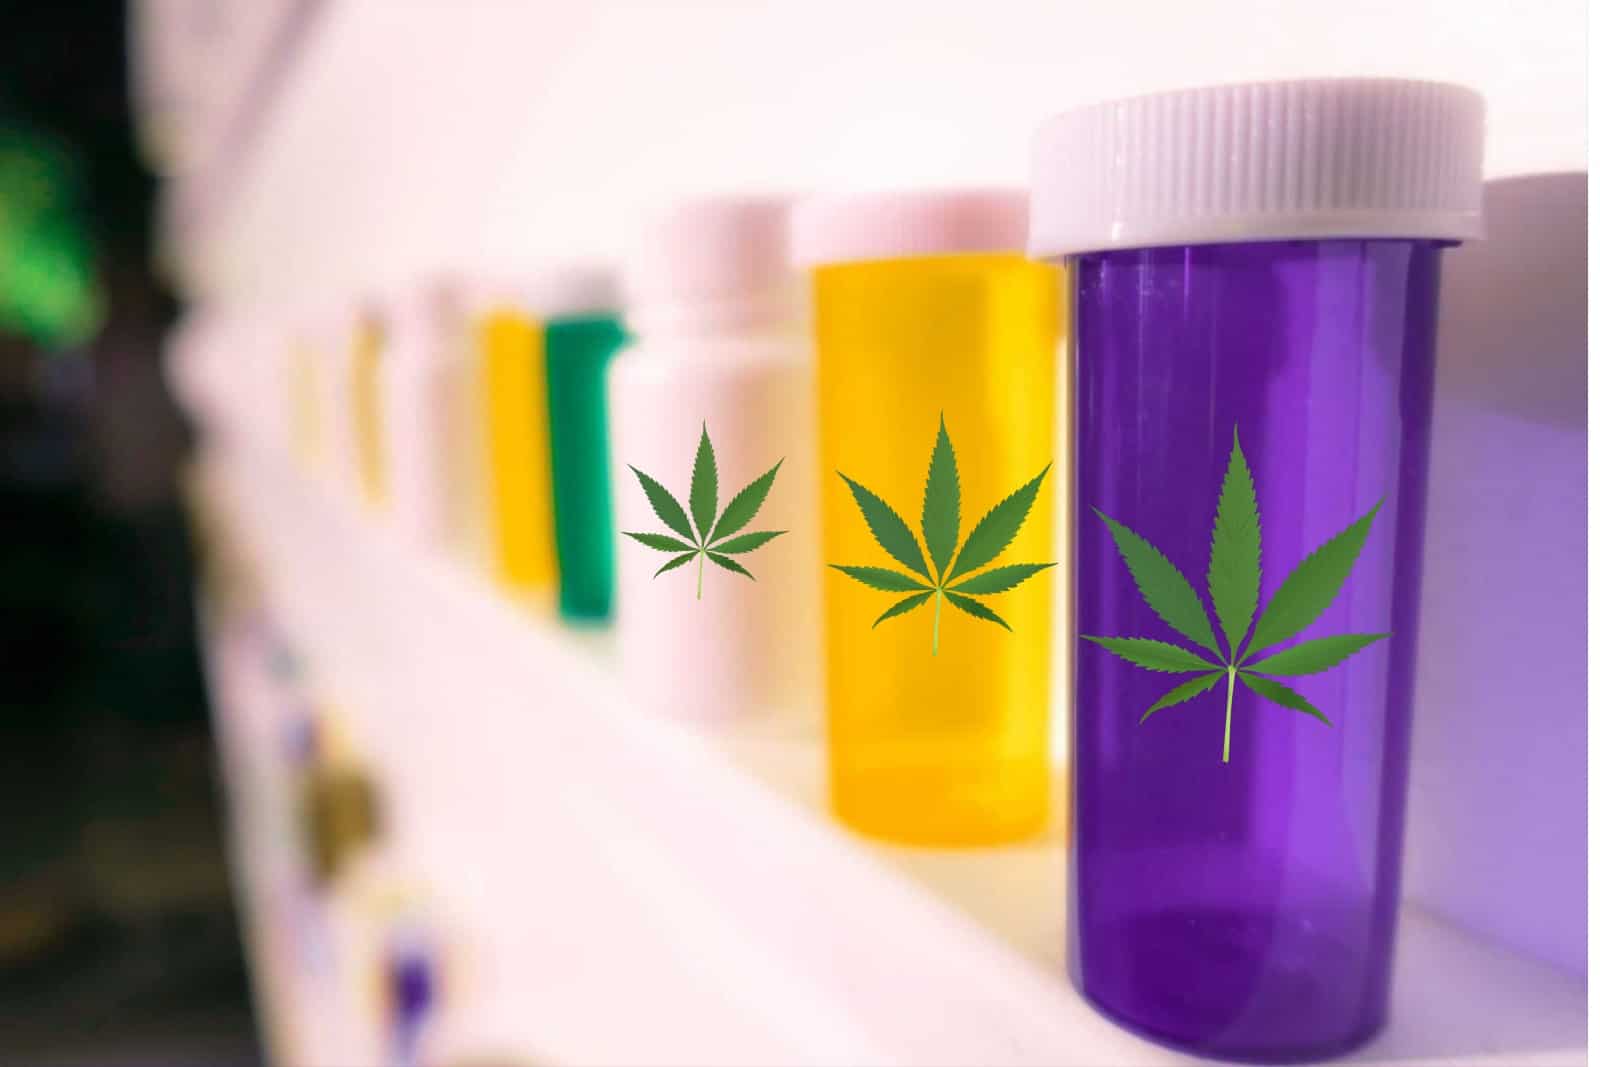 Prescribing Medical Cannabis: Who, Where, What and is it Legal?